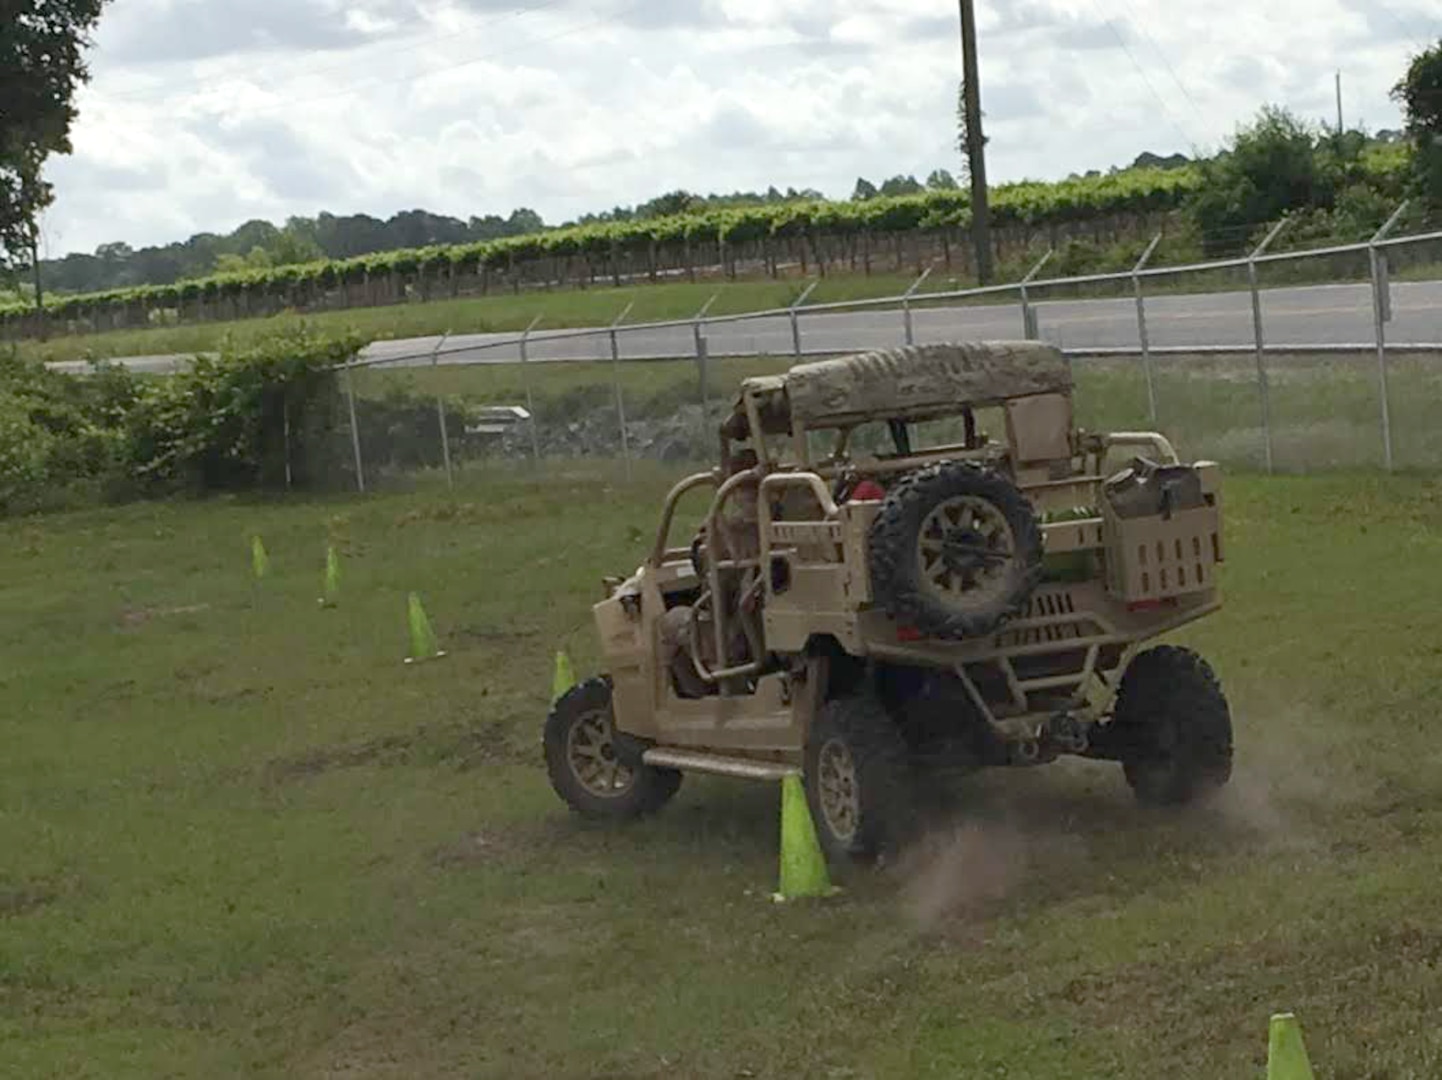 Deputy Jerry Griffin trains on the serpentine course in the tactical dune buggy used to handle challenging terrain.